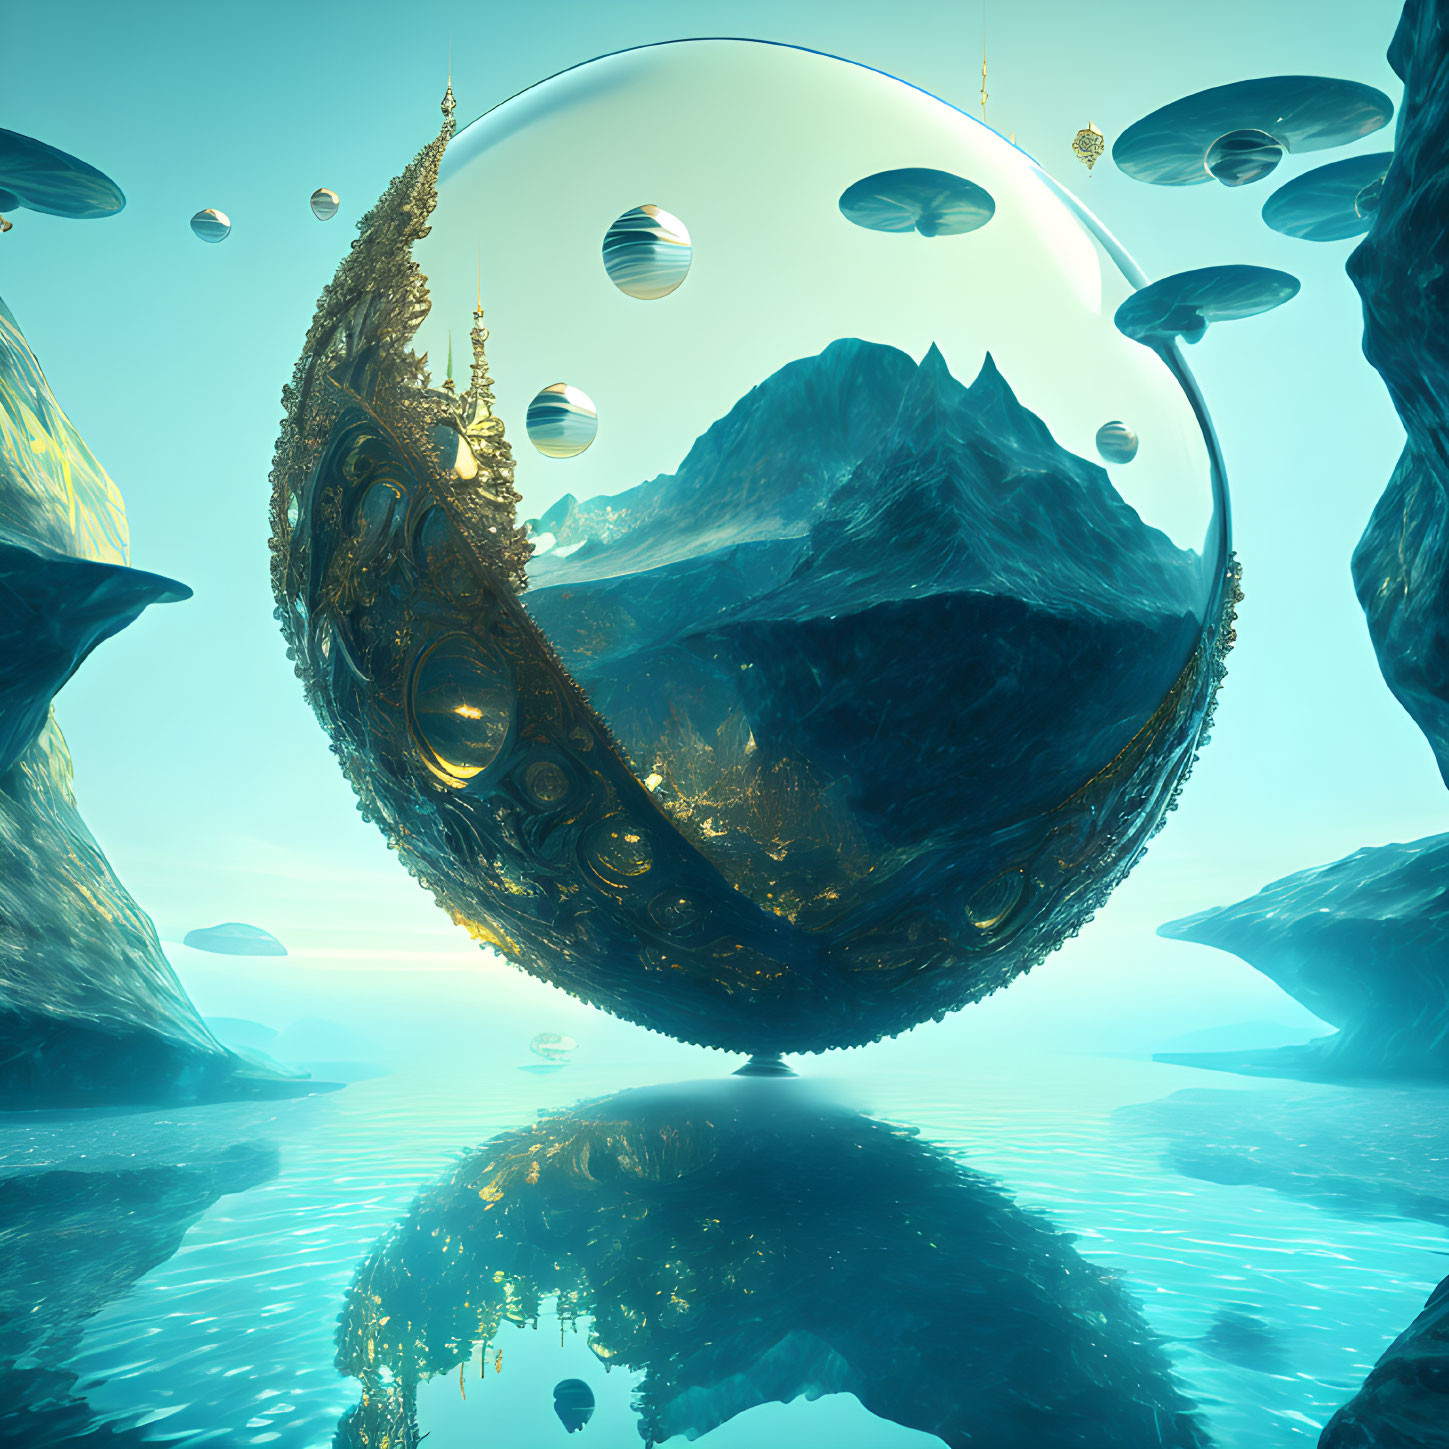 Surreal landscape with floating ornate spheres over mountain reflection